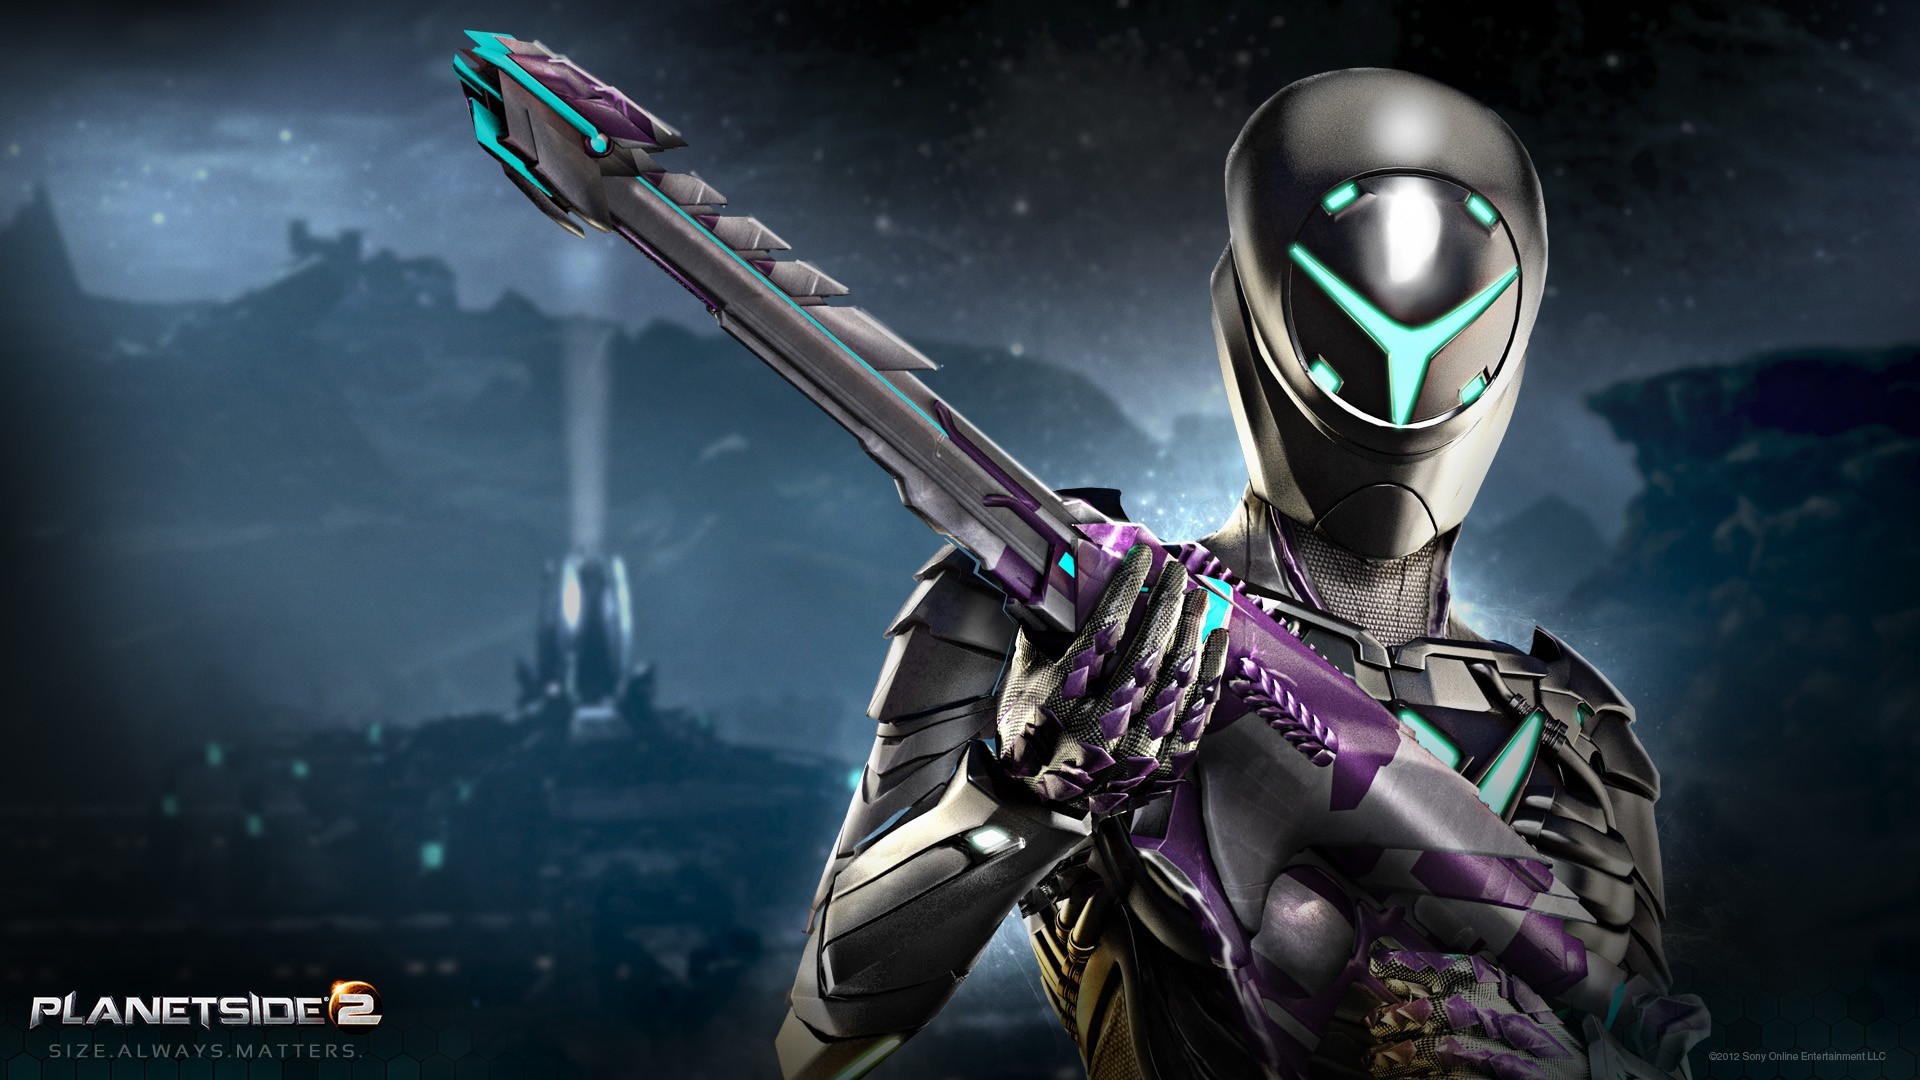 General 1920x1080 Planetside 2 Vanu Sovereignty video games PC gaming weapon science fiction